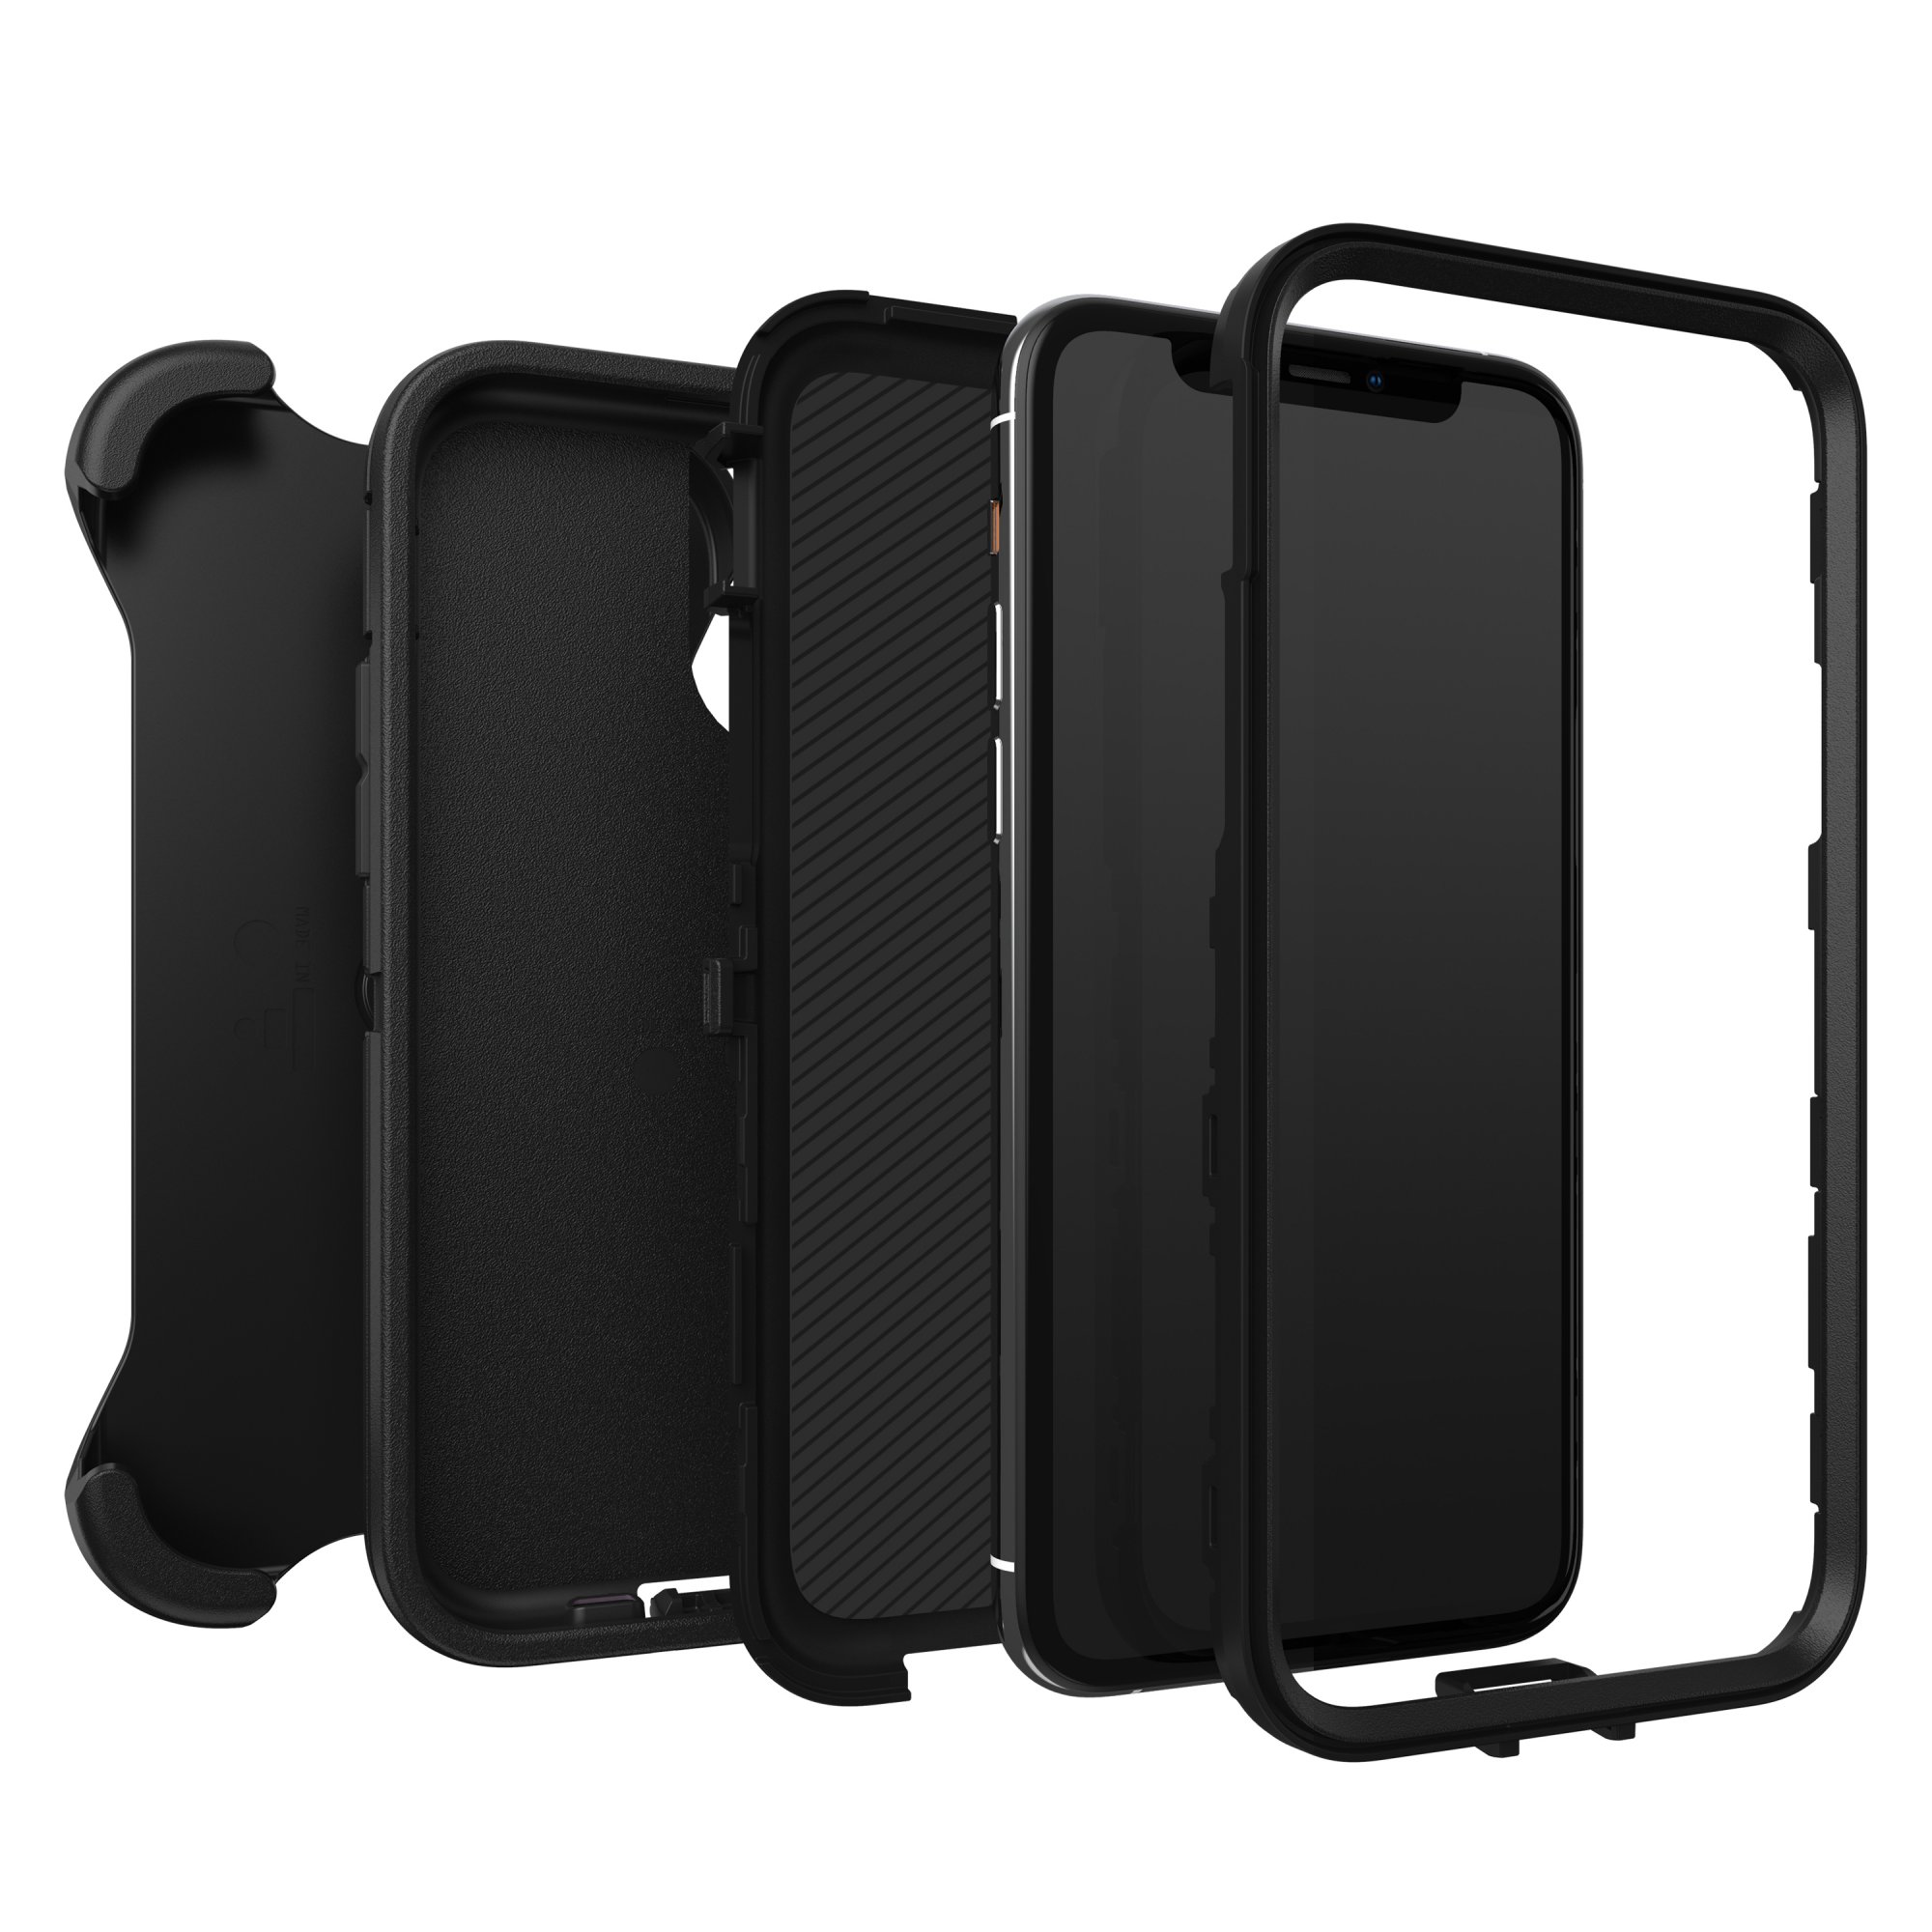 Otterbox OtterBox Defender Series for Apple iPhone 11 Pro, black